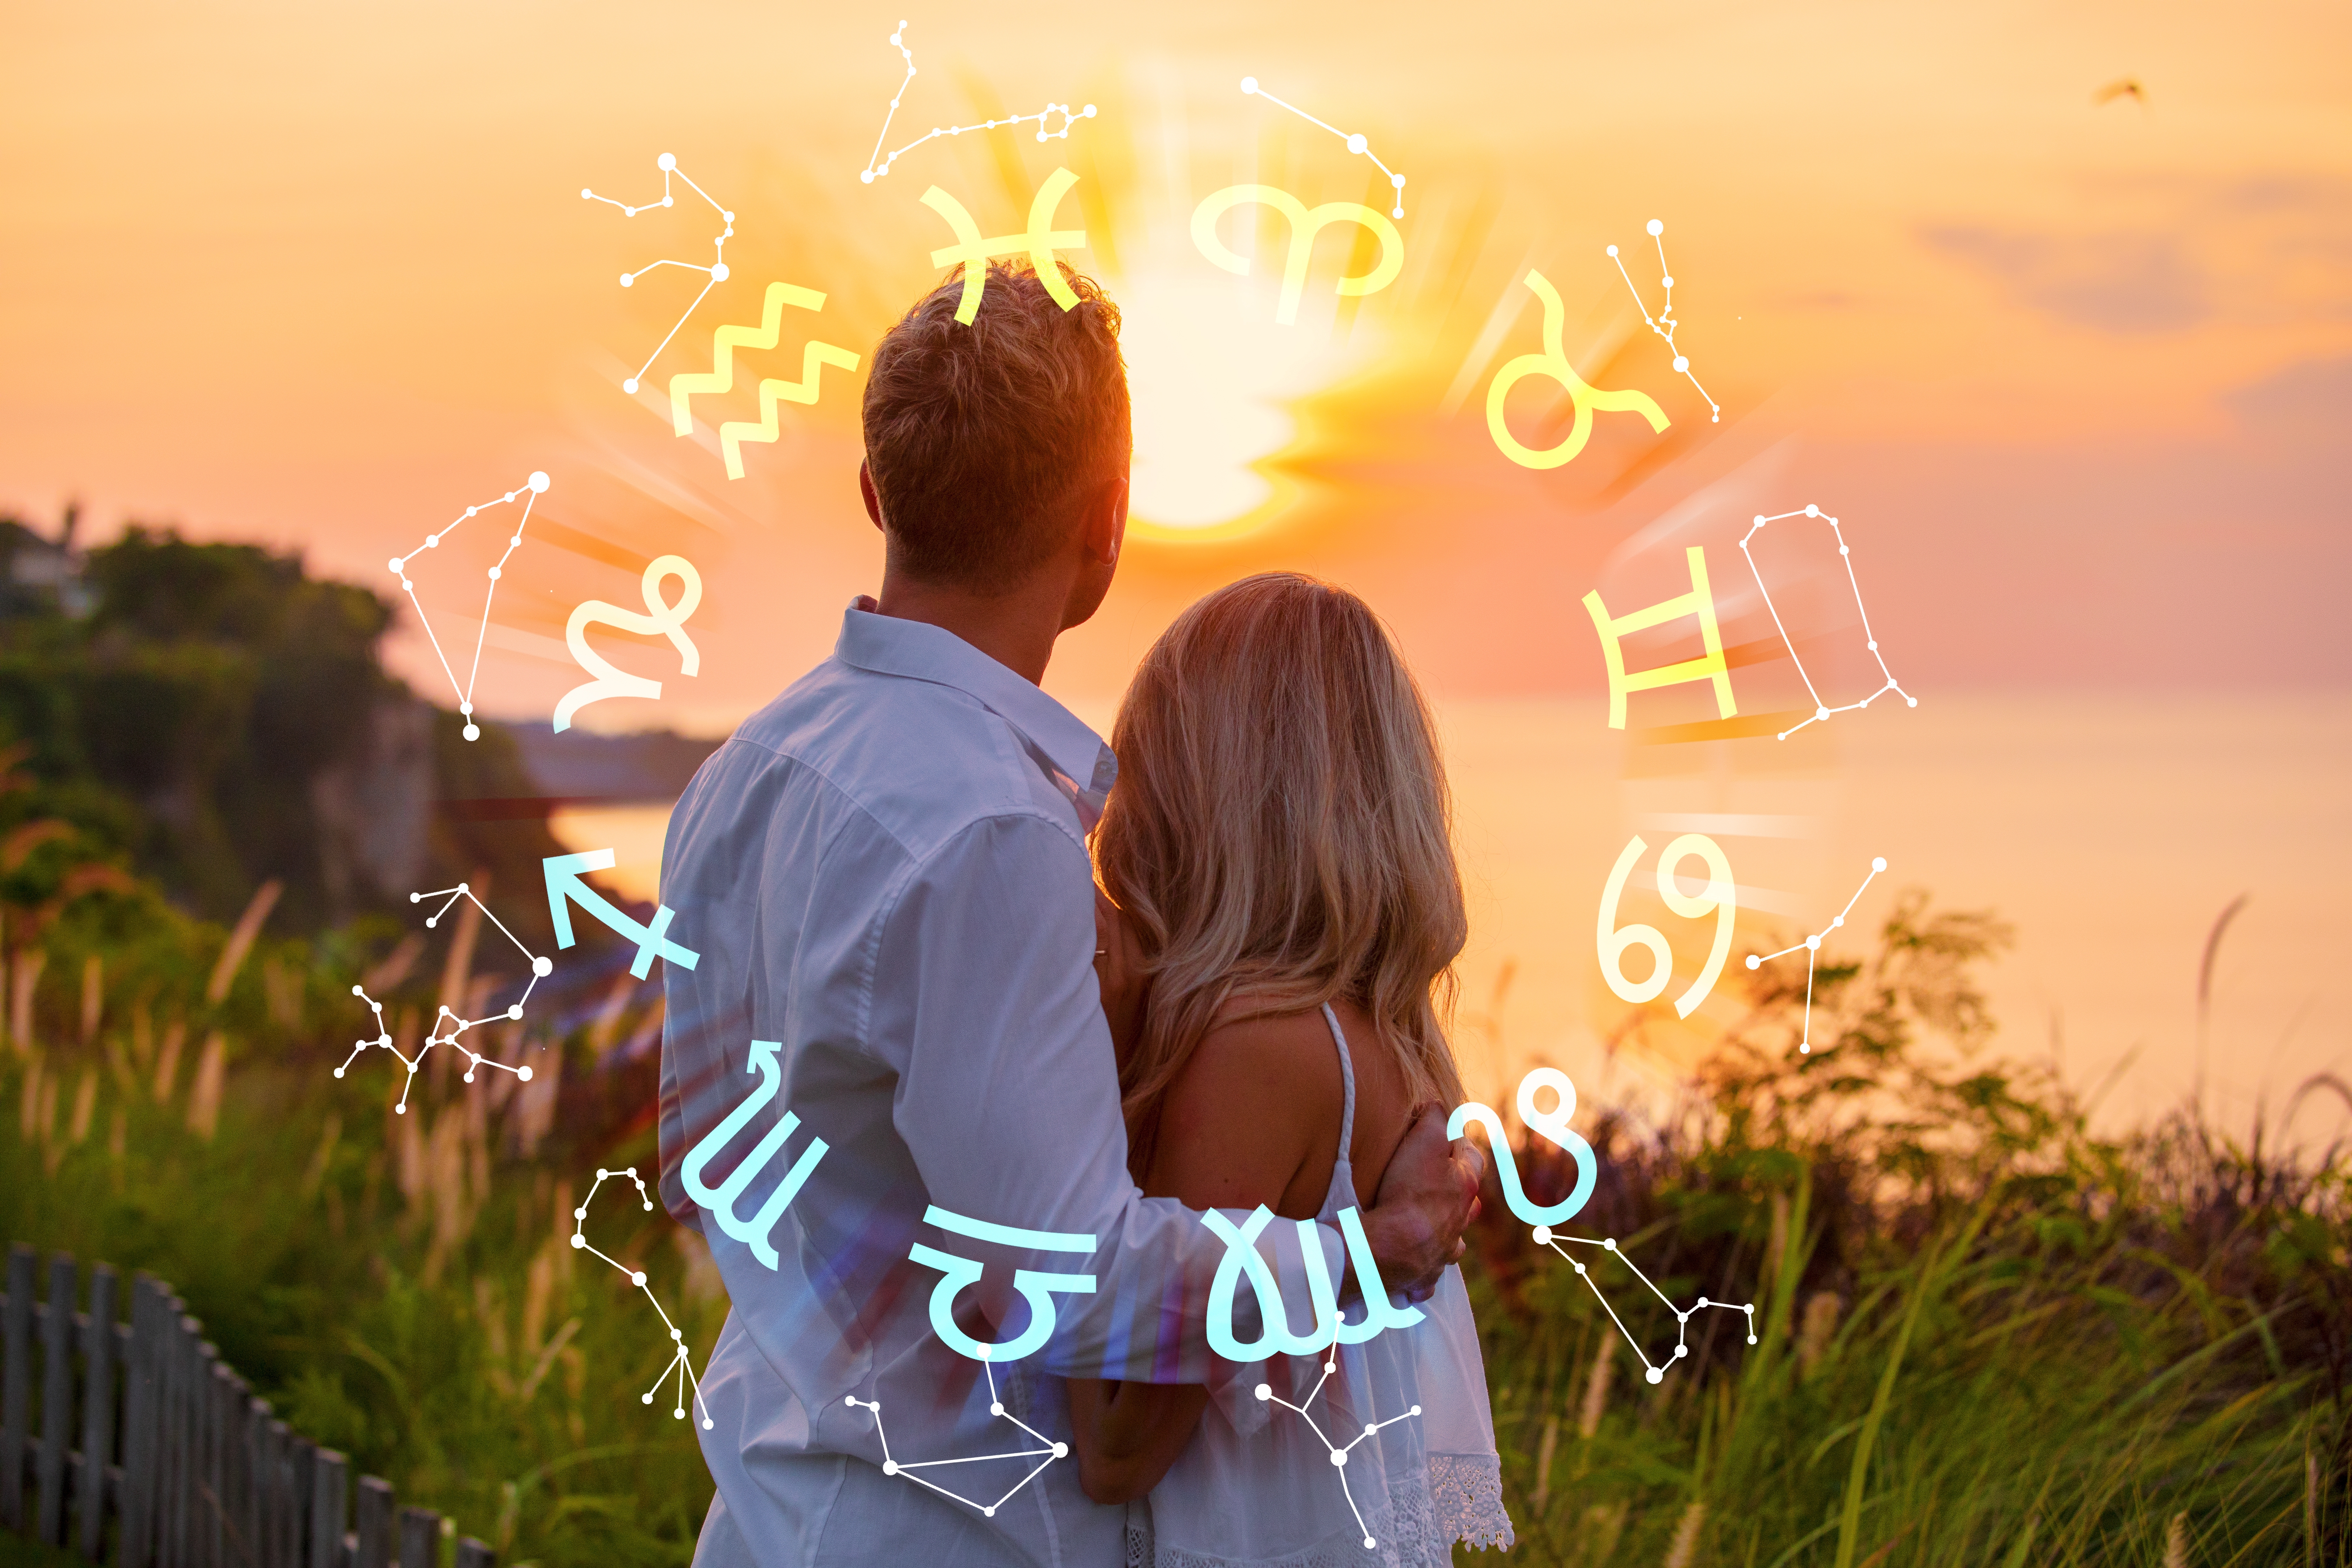 A couple enjoying a beautiful sunset with an image of the zodiac overlayed | Source: Shutterstock